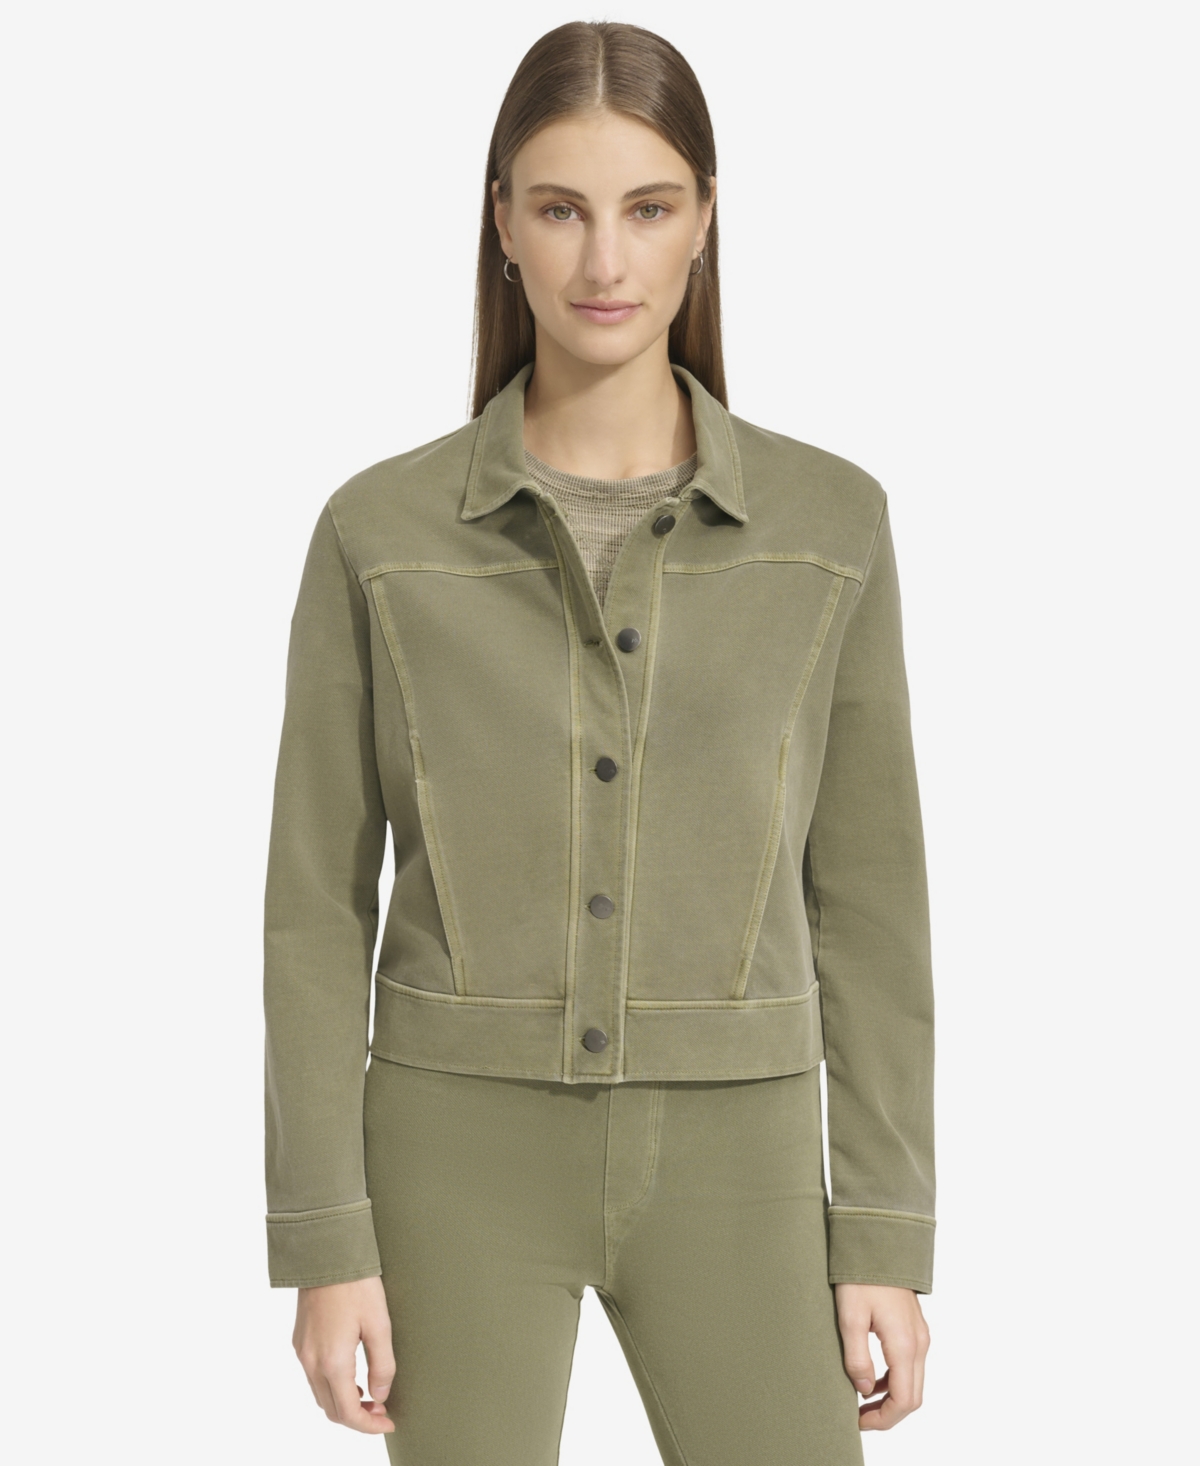 Women's Soft Stretch Twill Button Front Jacket - Forest green